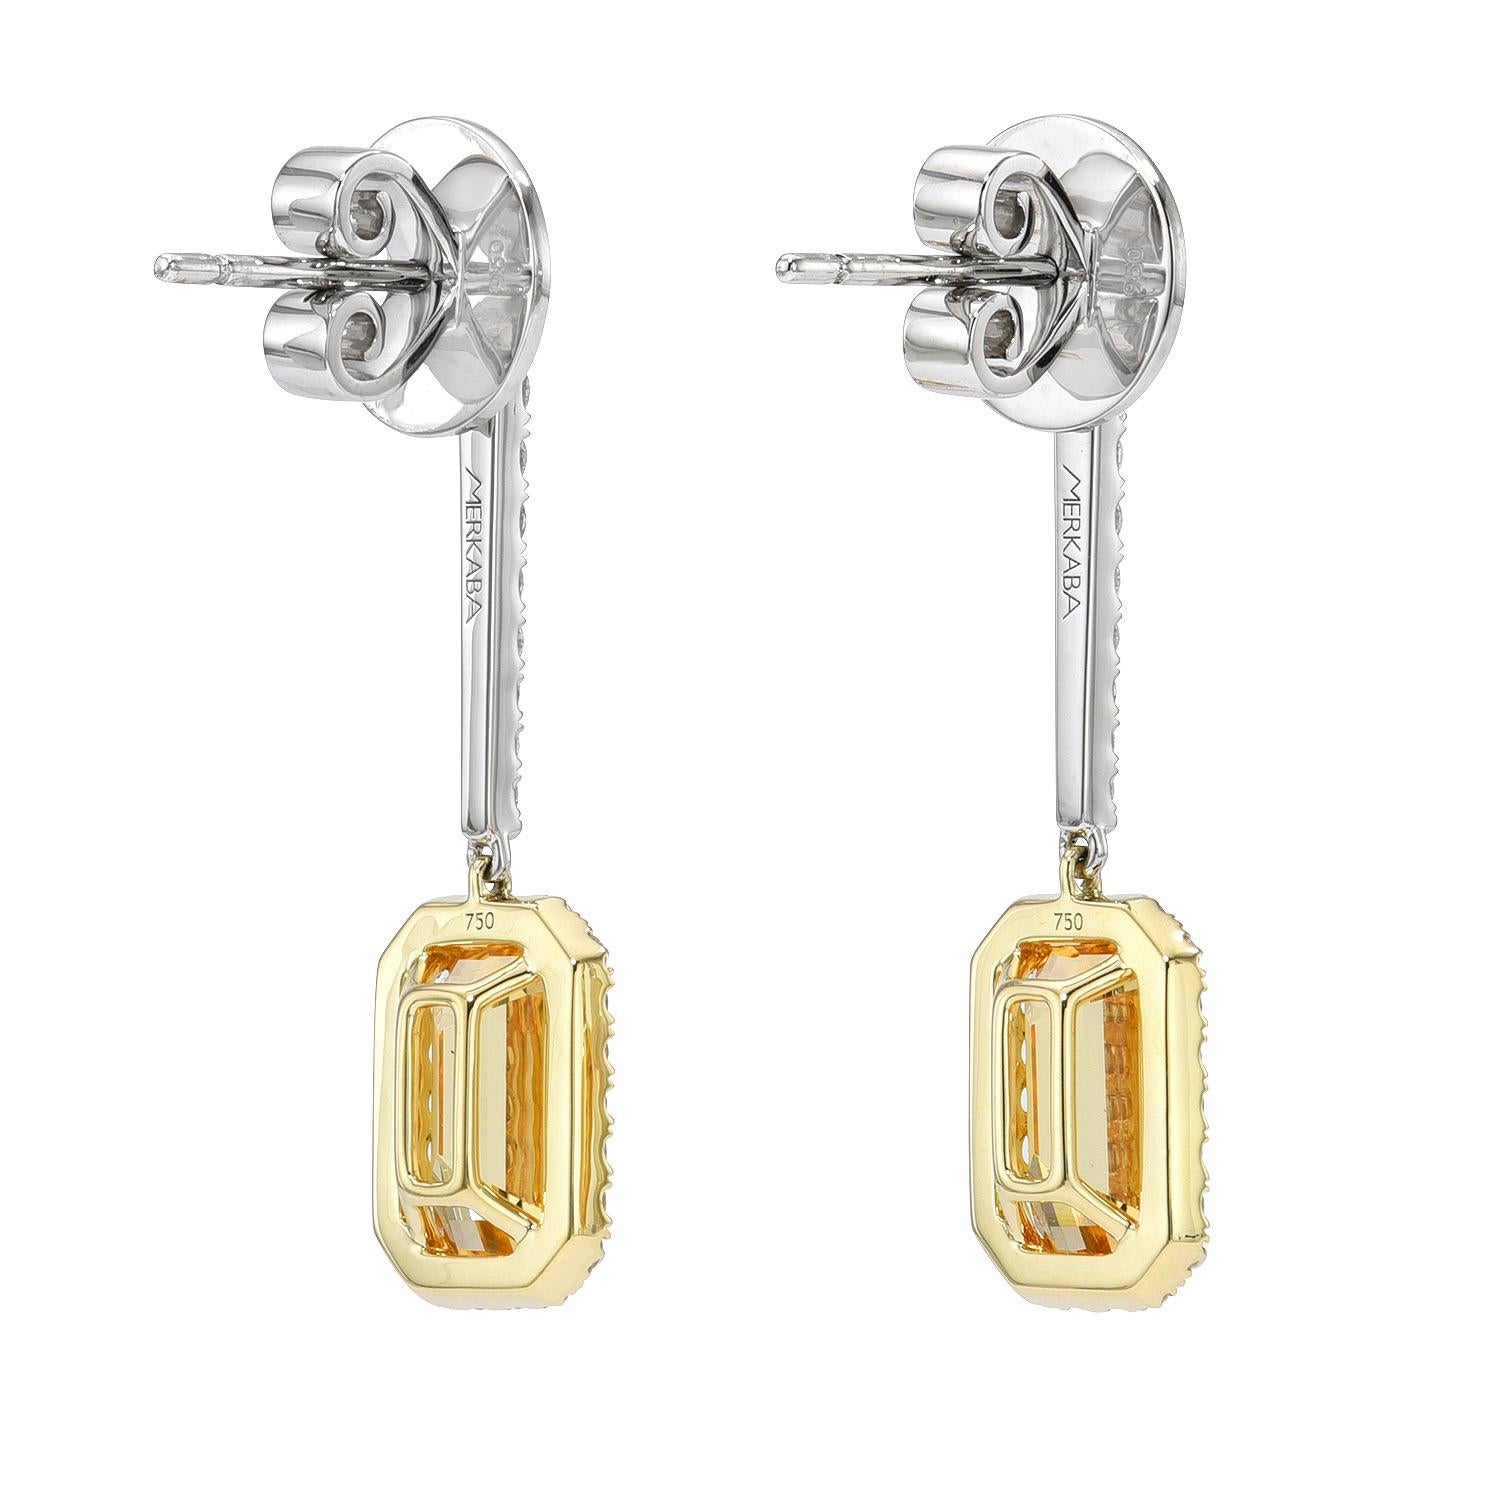 Captivating pair of 4.36 carat Brazilian Imperial Topaz Emerald Cuts, 18K yellow gold and platinum earrings, decorated with a total of 0.67 carat round brilliant diamonds.
Returns are accepted and paid by us within 7 days of delivery.

Please FOLLOW